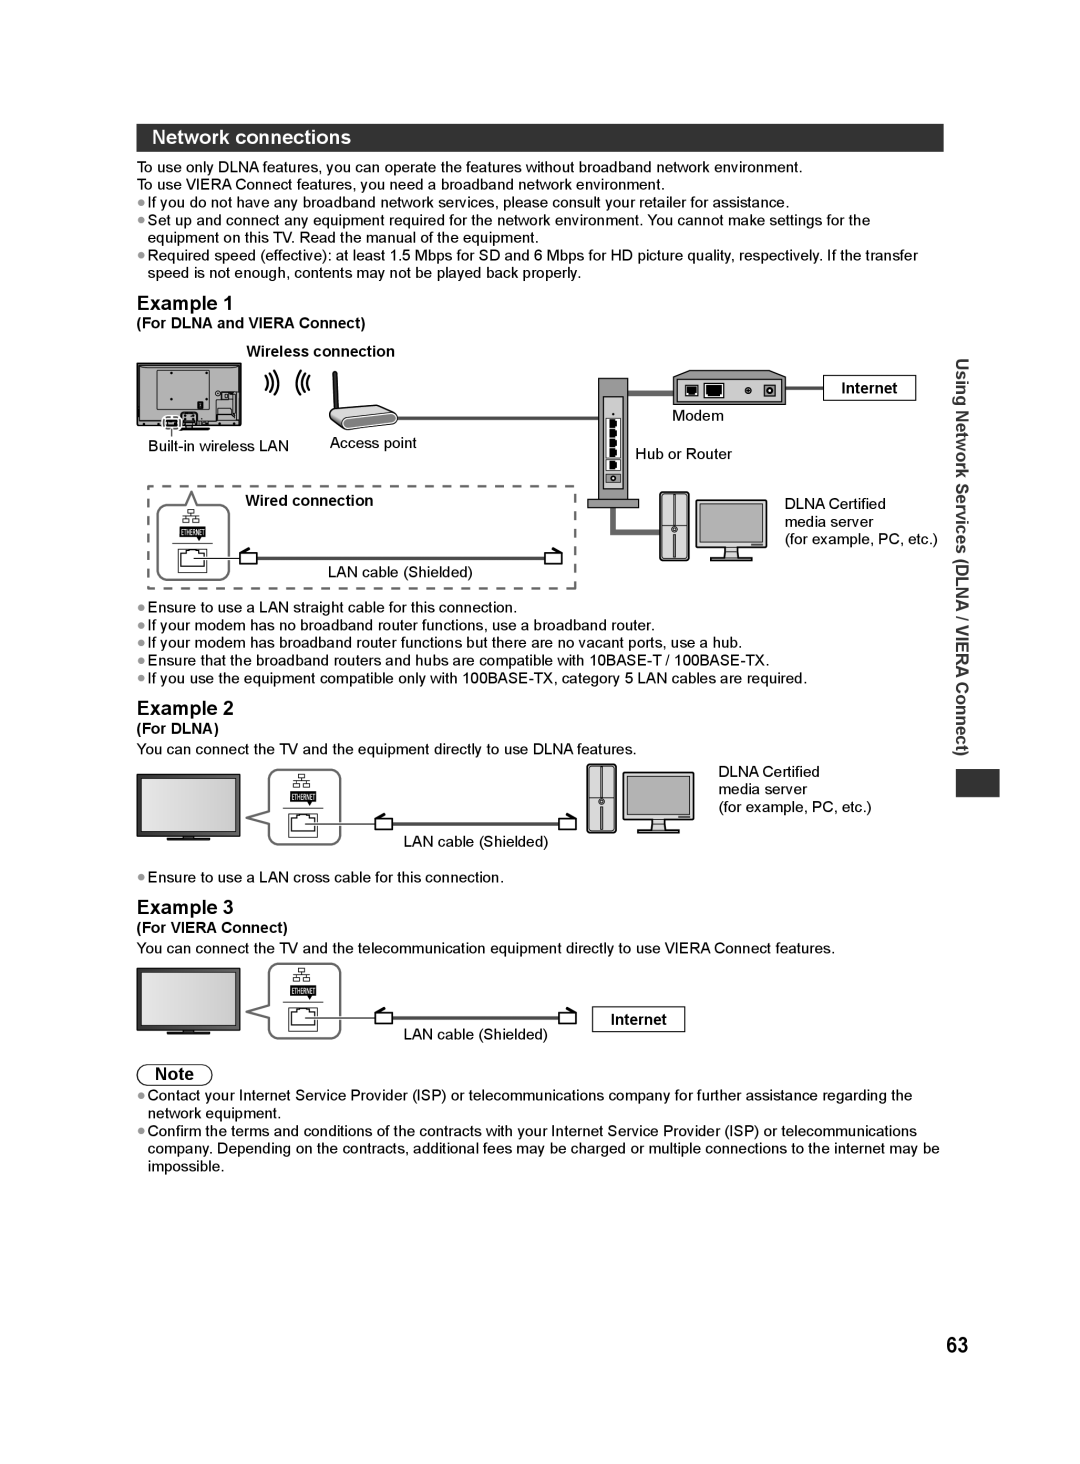 Panasonic ST50P, ST50T, ST50D, ST50M, ST50K warranty Network connections, Example, VIERA Connect, Using Network Services DLNA 